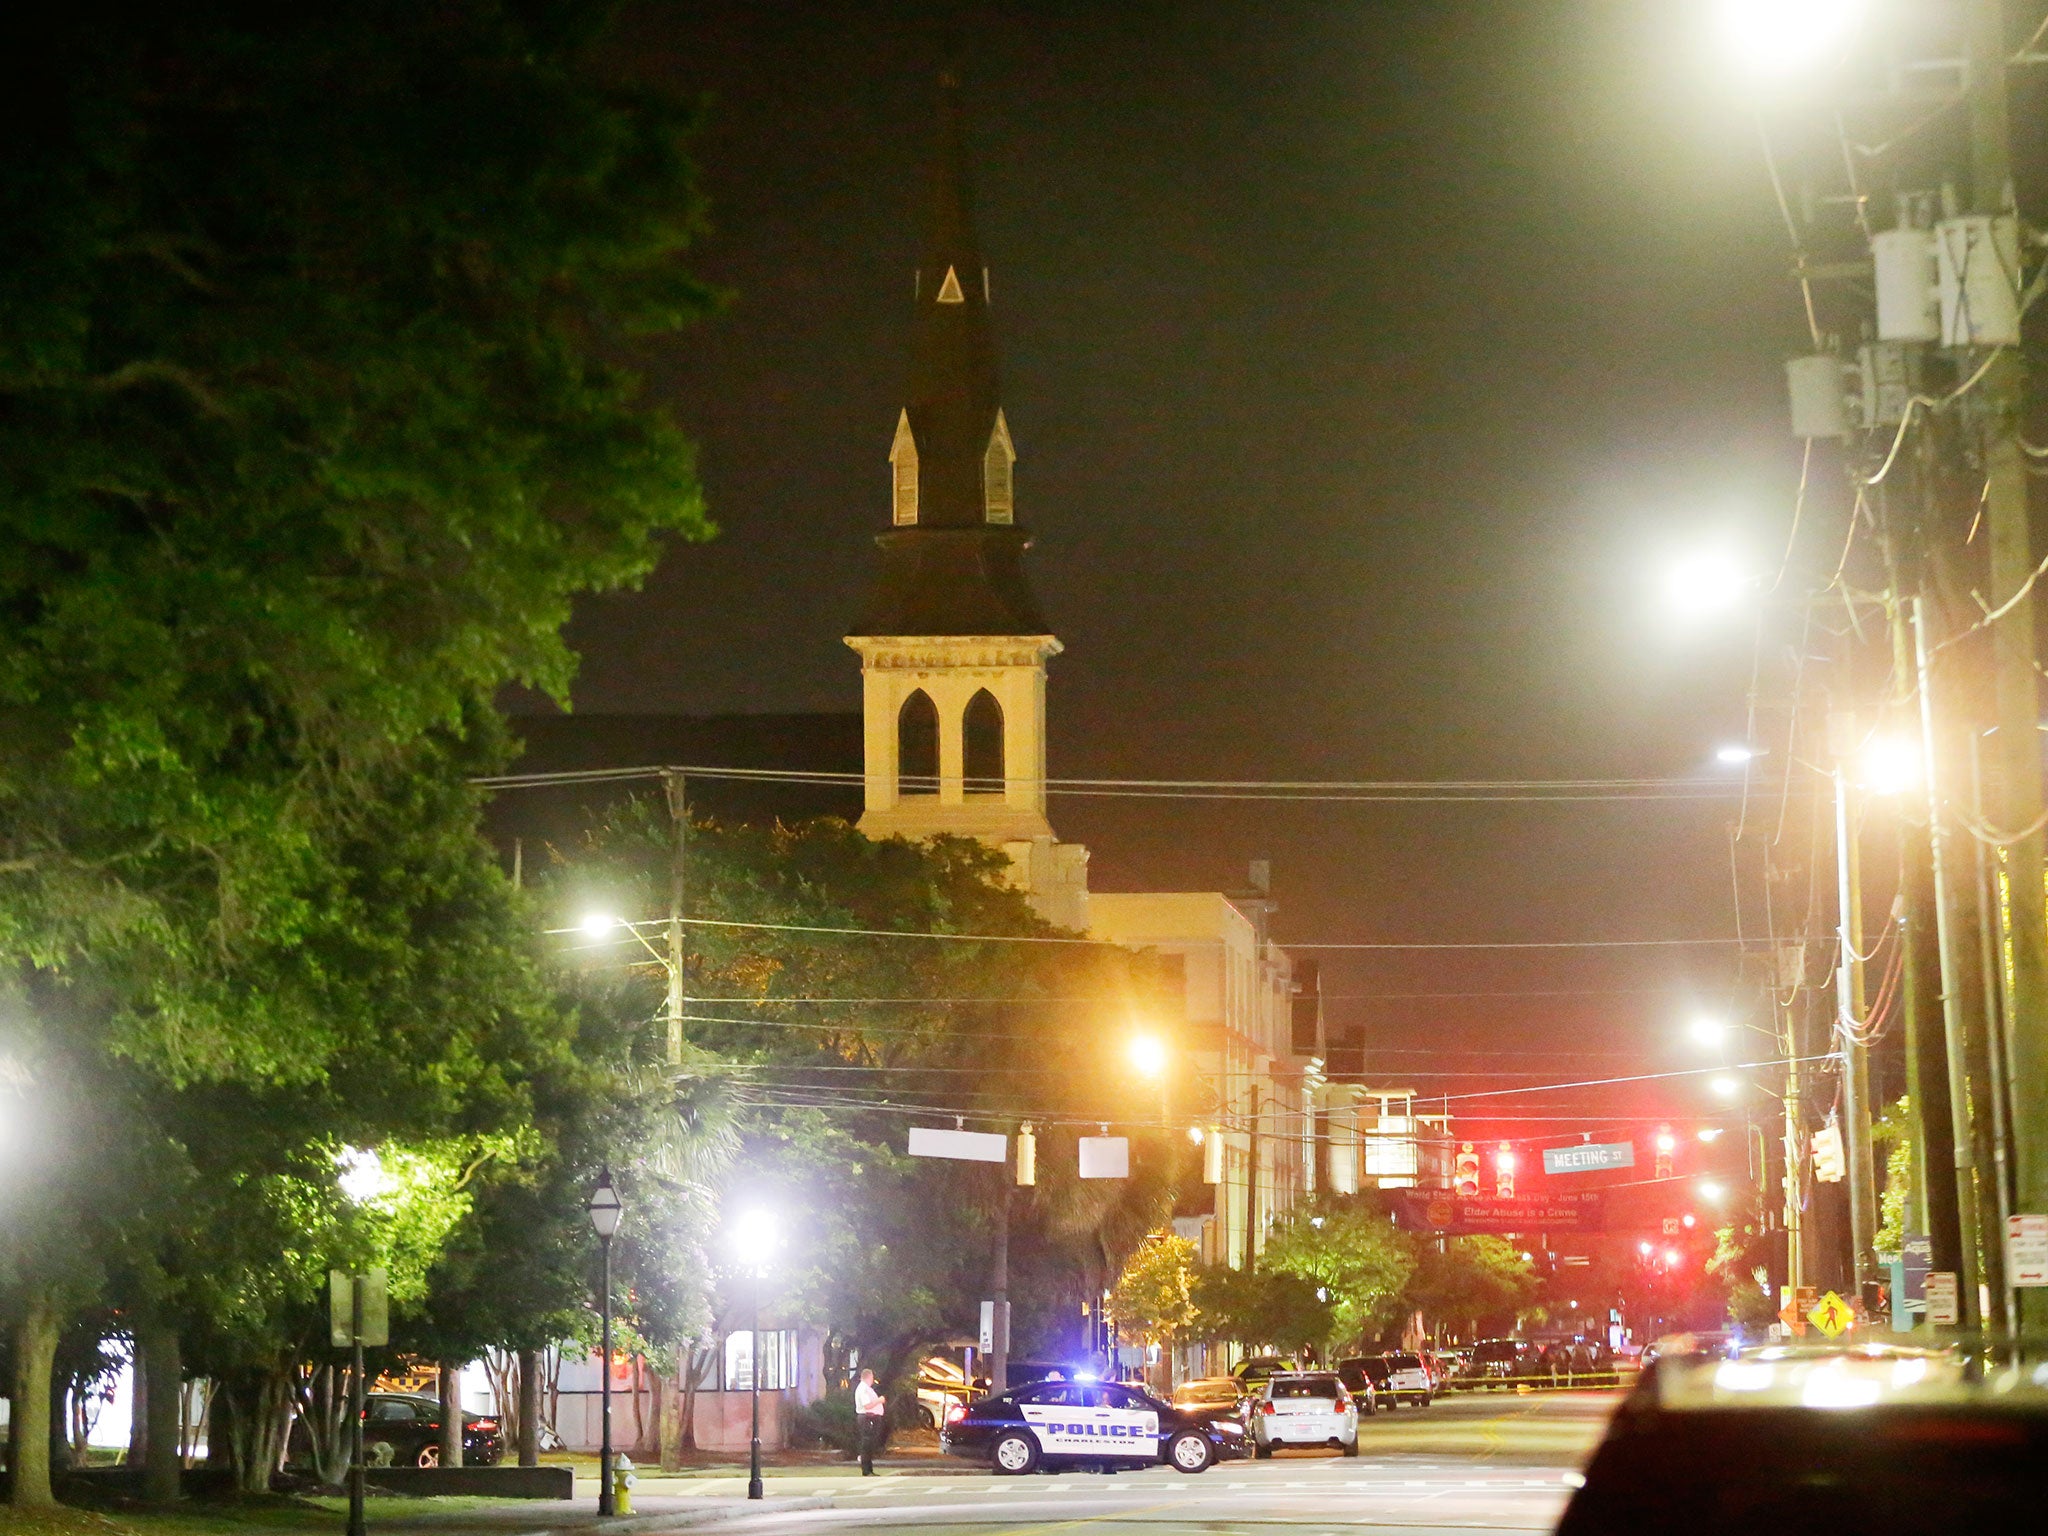 The steeple of Emanuel AME Church is visible as police close off a section of Calhoun Street following a shooting in Charleston